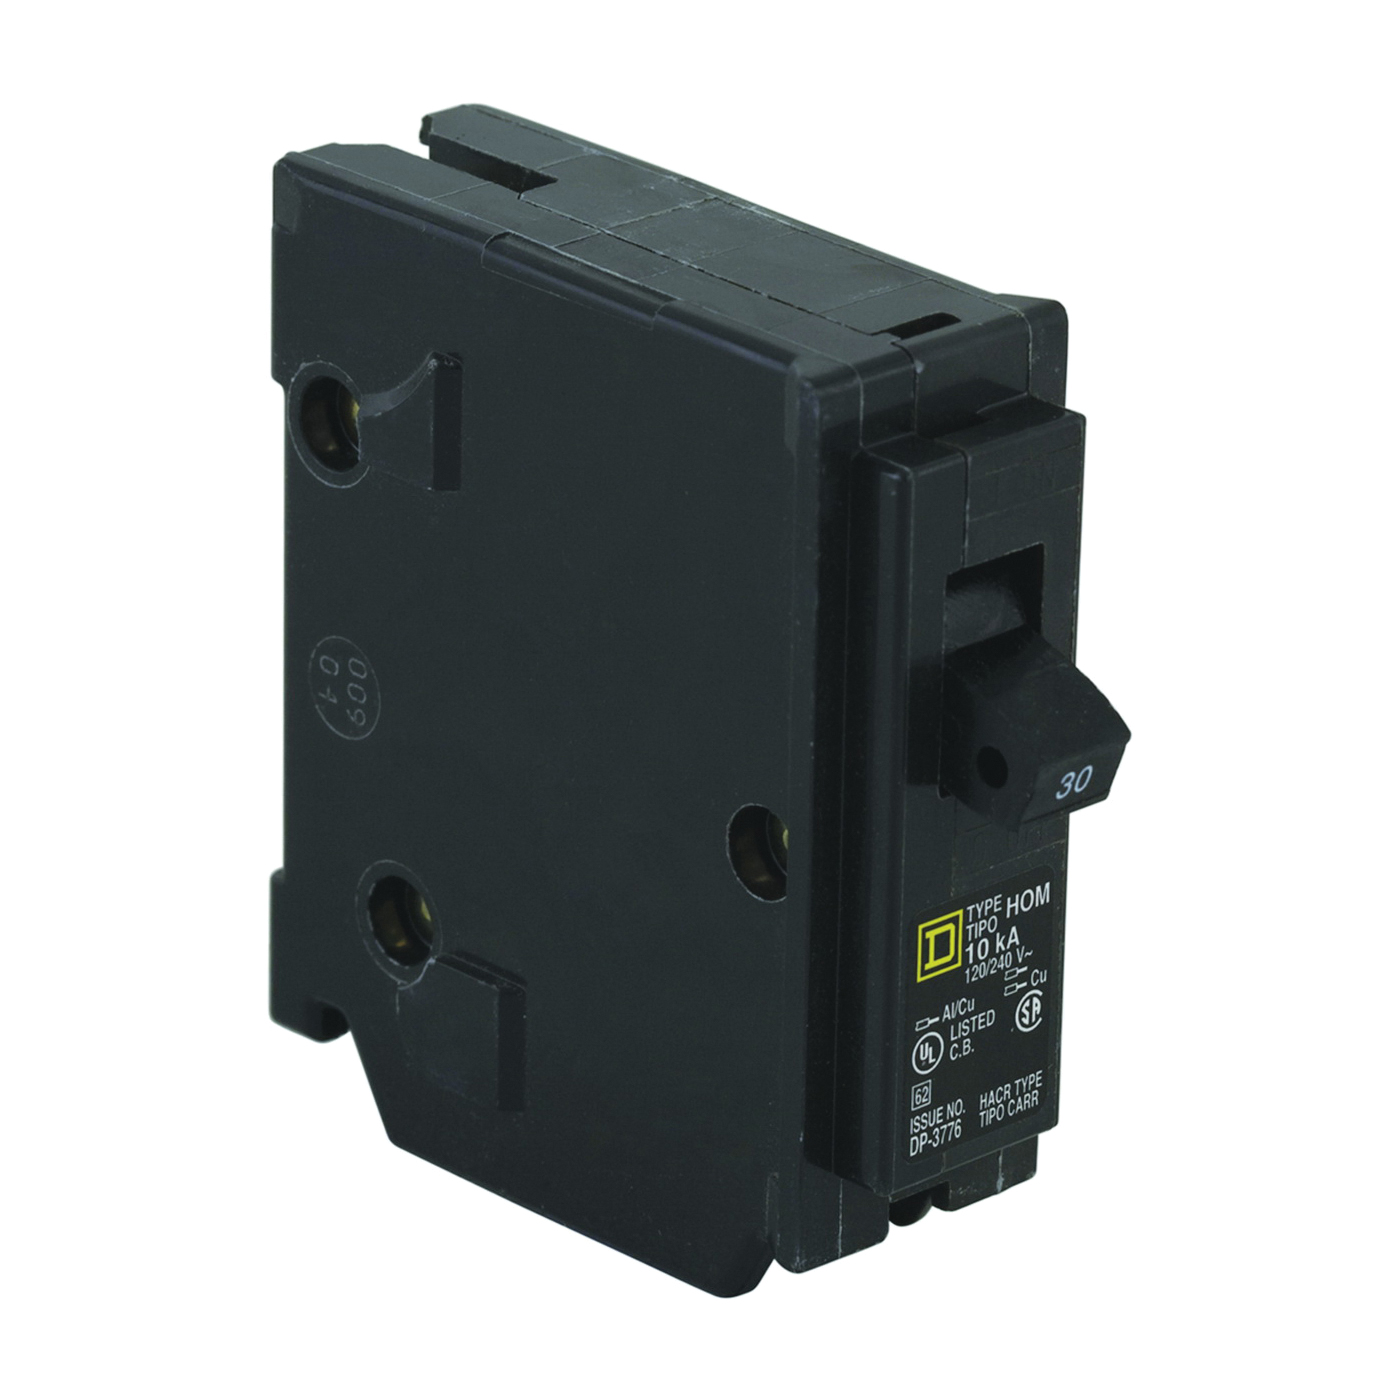 Square D Homeline HOM130CP Circuit Breaker, Miniature, 30 A, 1-Pole, 120 V, Fixed Trip, Plug-In Mounting, Black - 1